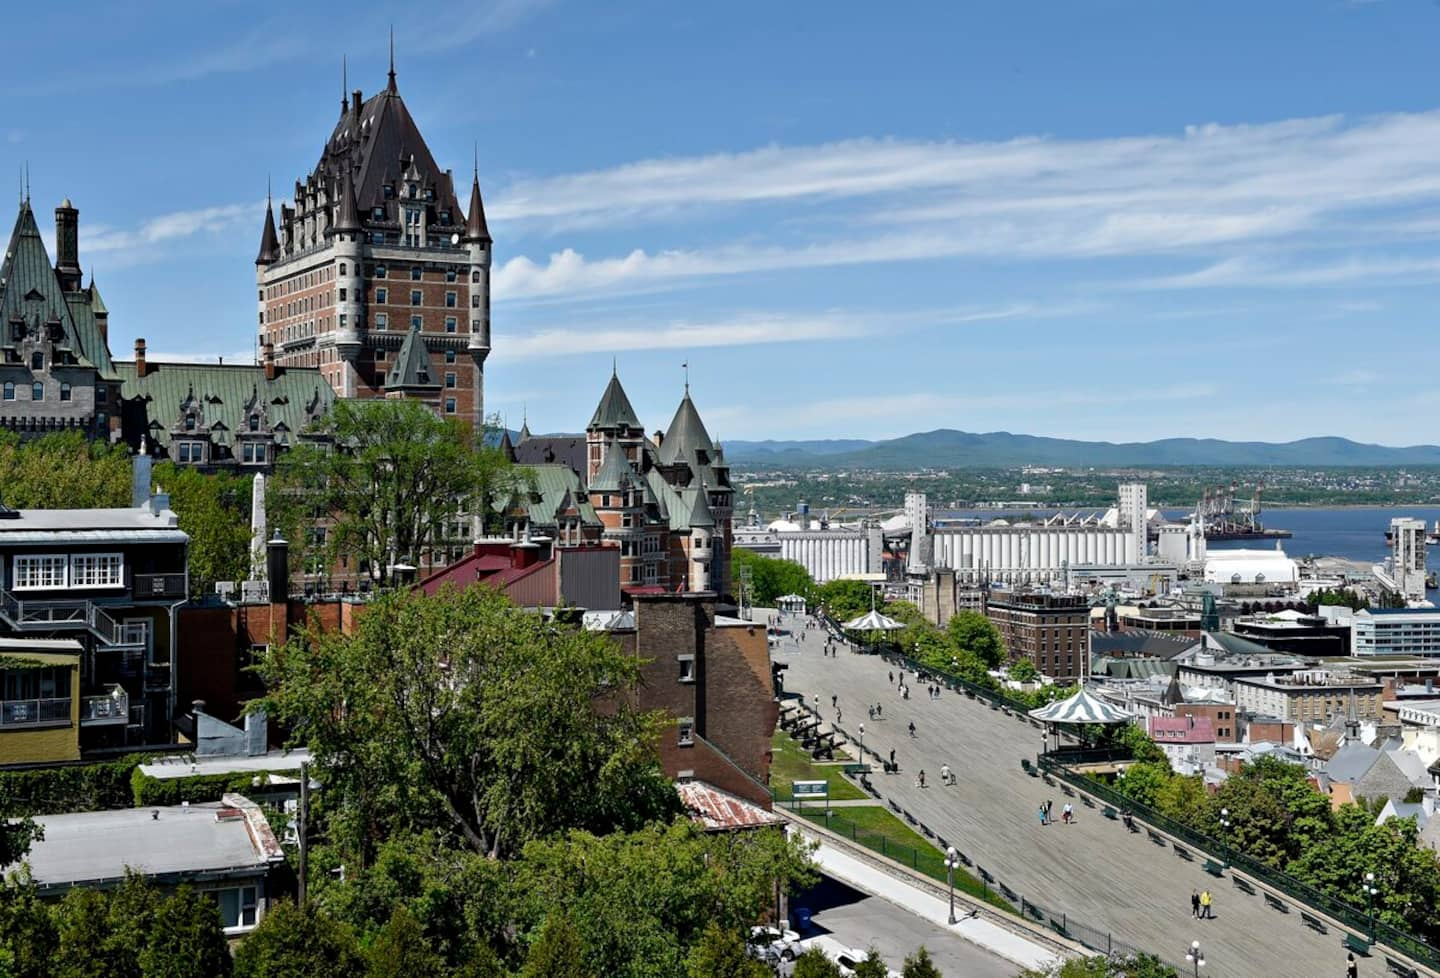 Summer vacation: nearly one out of two Quebecers opts for Quebec